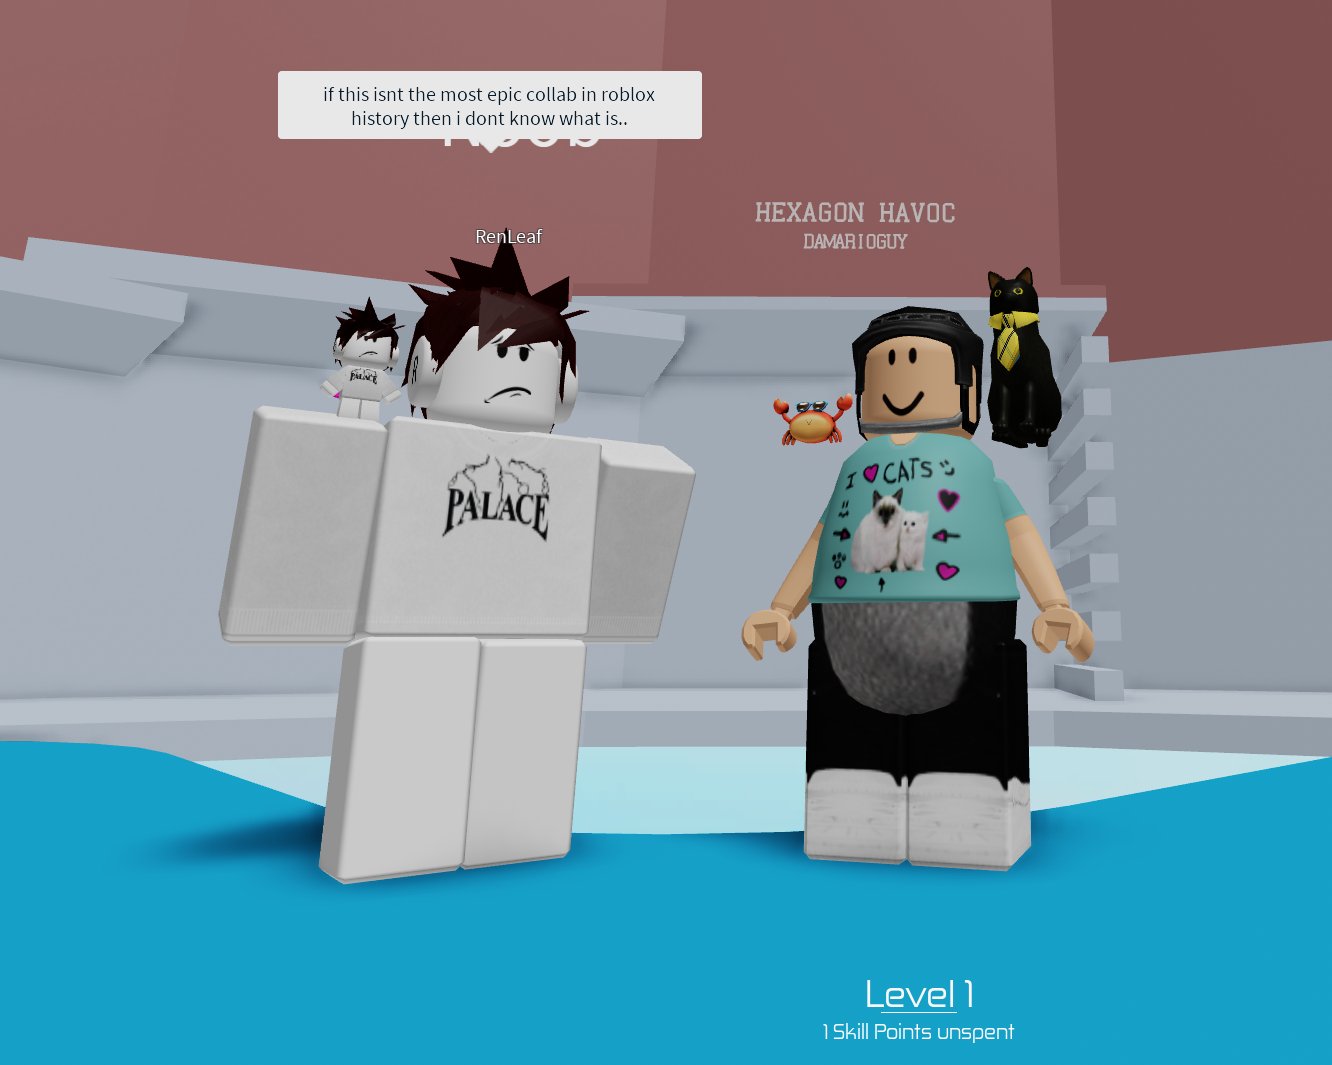 Denis On Twitter Denis Vs Realpinkleaf In The Tower Of Heck Who Is The True Obby Master Master Of Obbies Obby Legend Find Out August 16th Https T Co Ceabhjxtxy - denis roblox obby